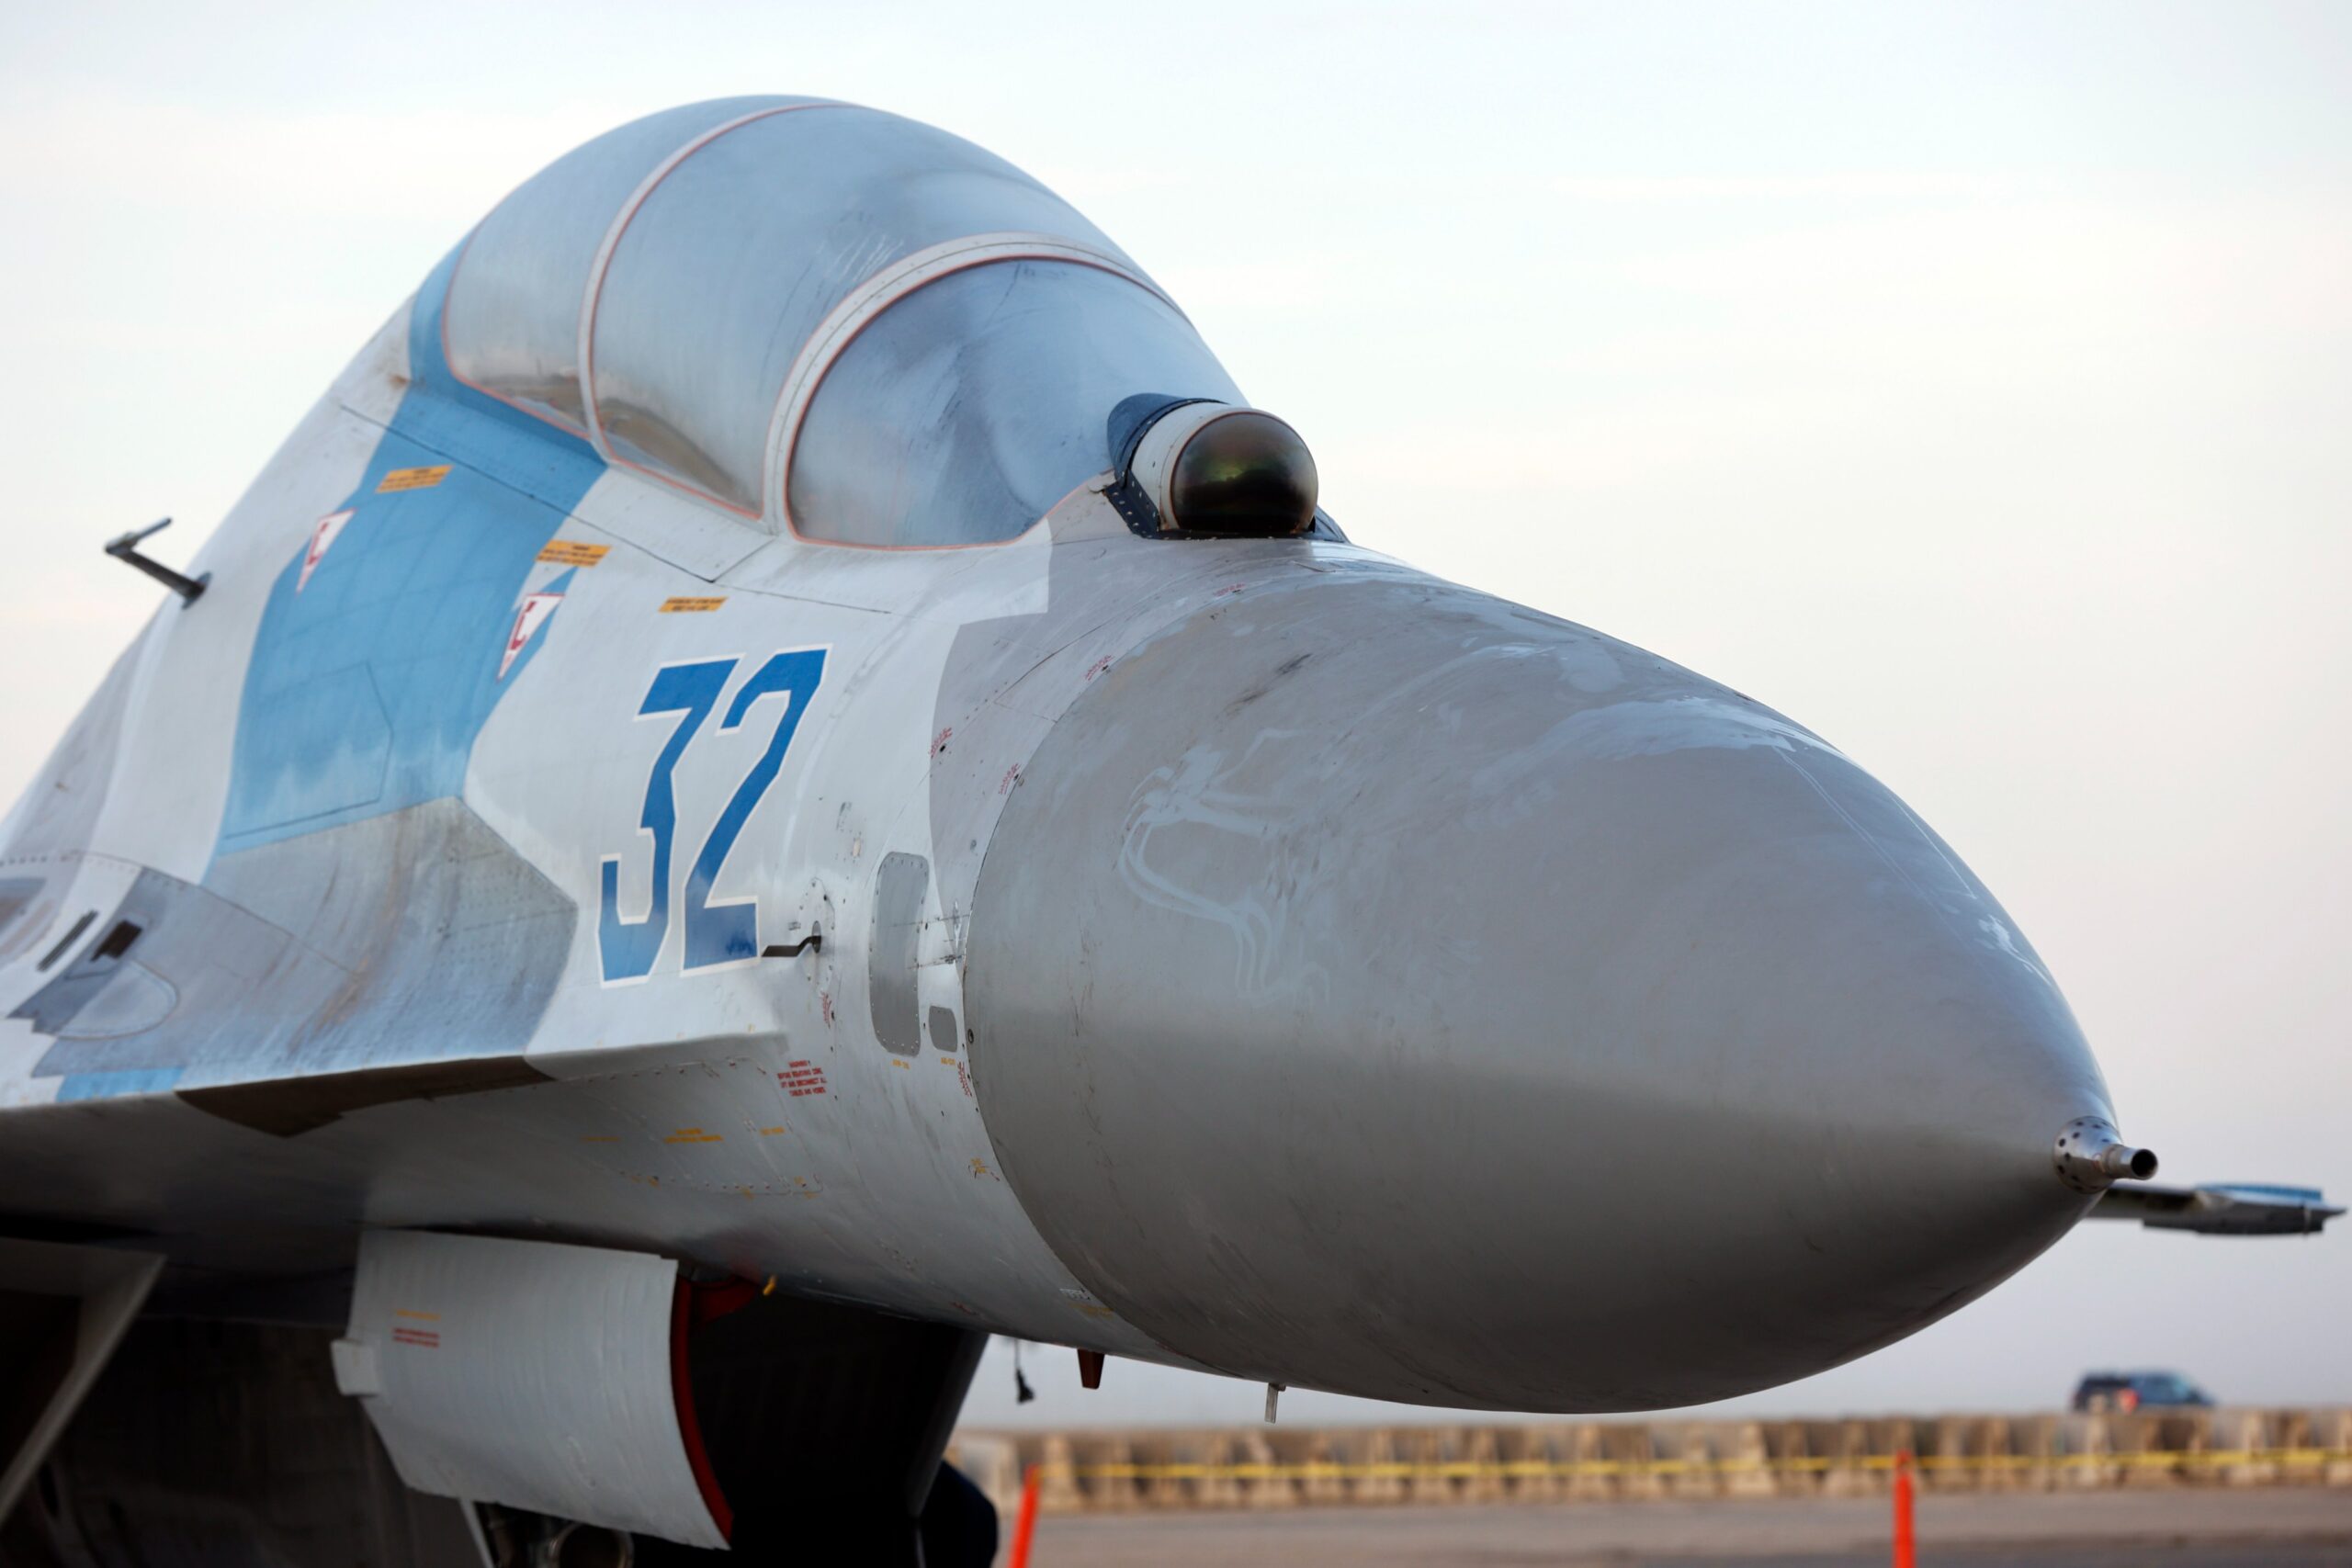 DC Designs announces imminent release of Sukhoi SU-27 Flanker for